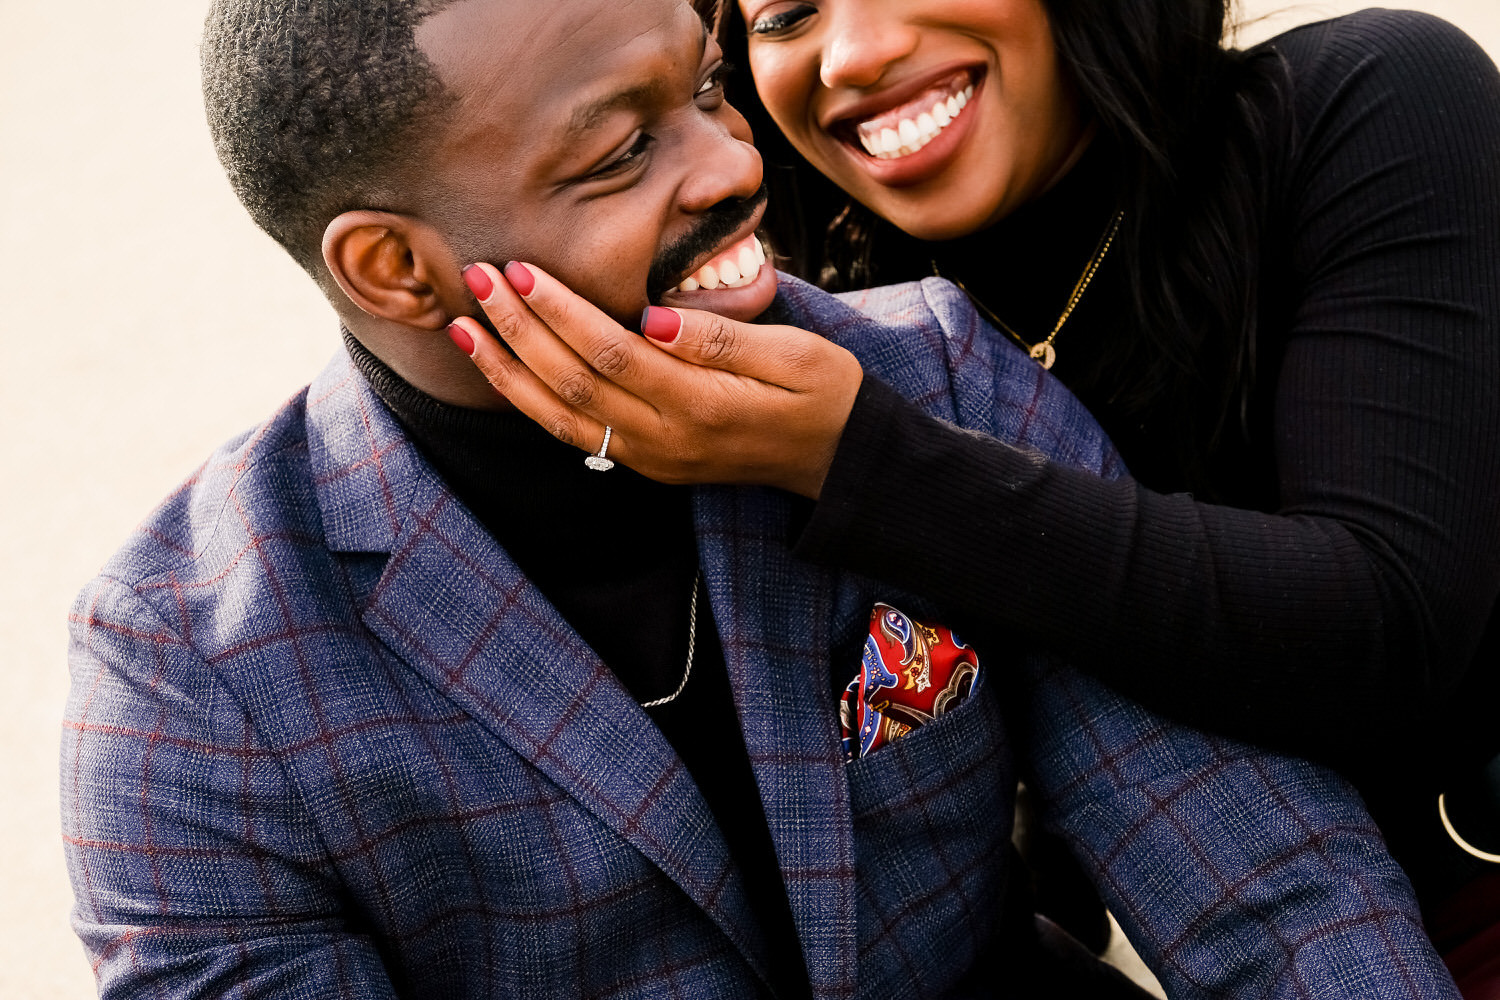 pittsburgh proposal photo • Pittsburgh Surprise Proposal Photography | Engagement